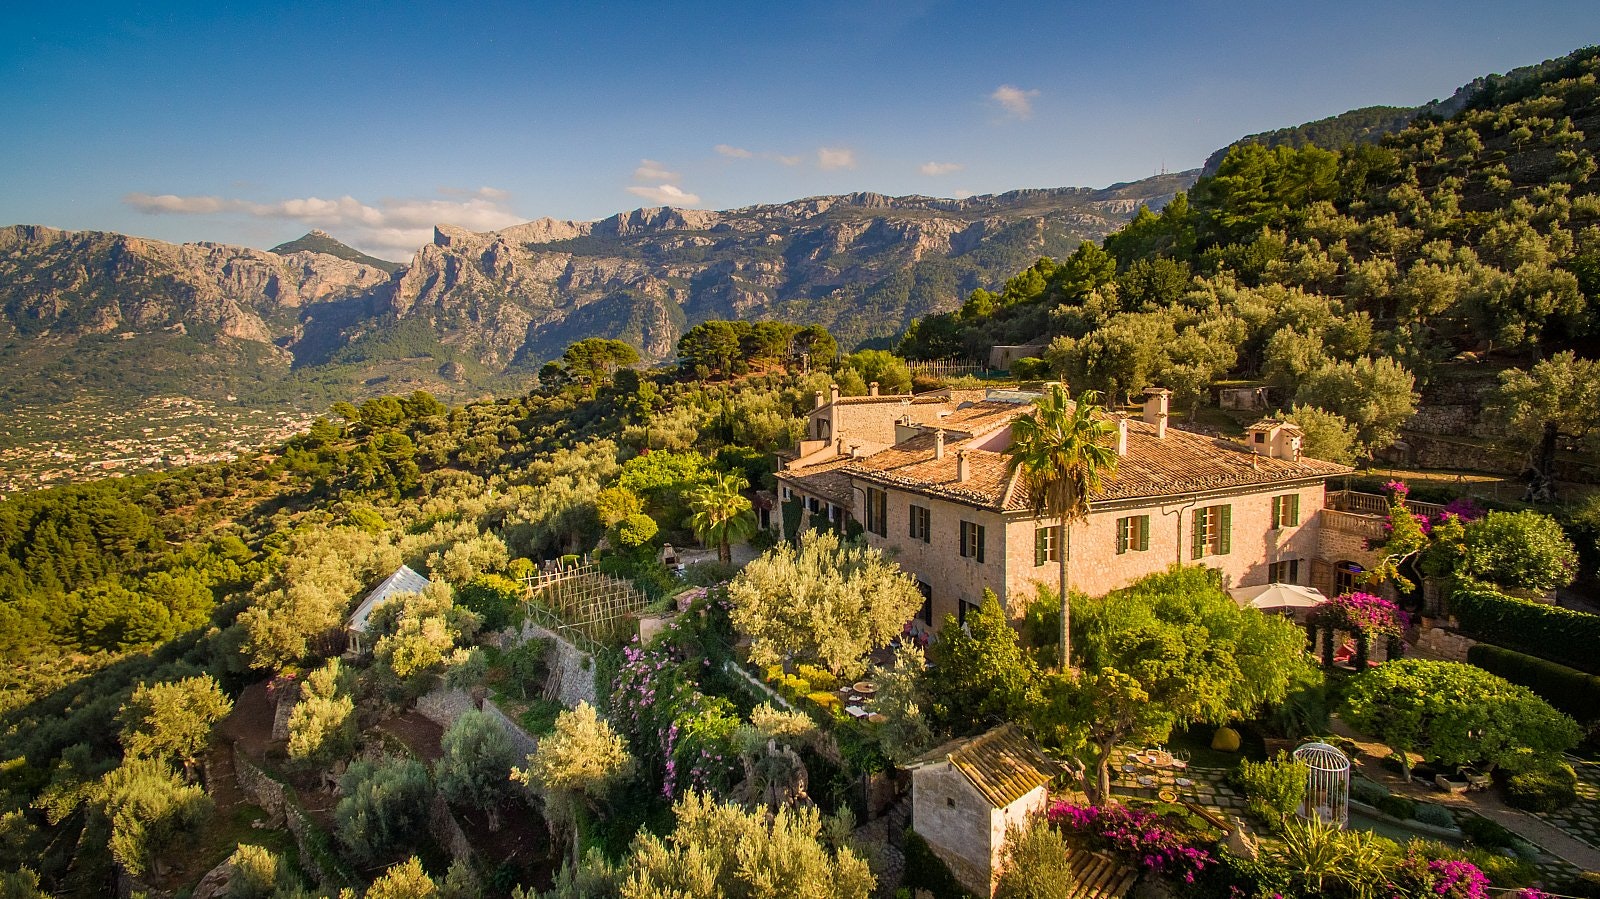 If you can't book the Love Island villa then book a stay at Ca's Xorc finca, a pinkish building set in a verdant garden with trees and pink flowers in a mountainous rural location.